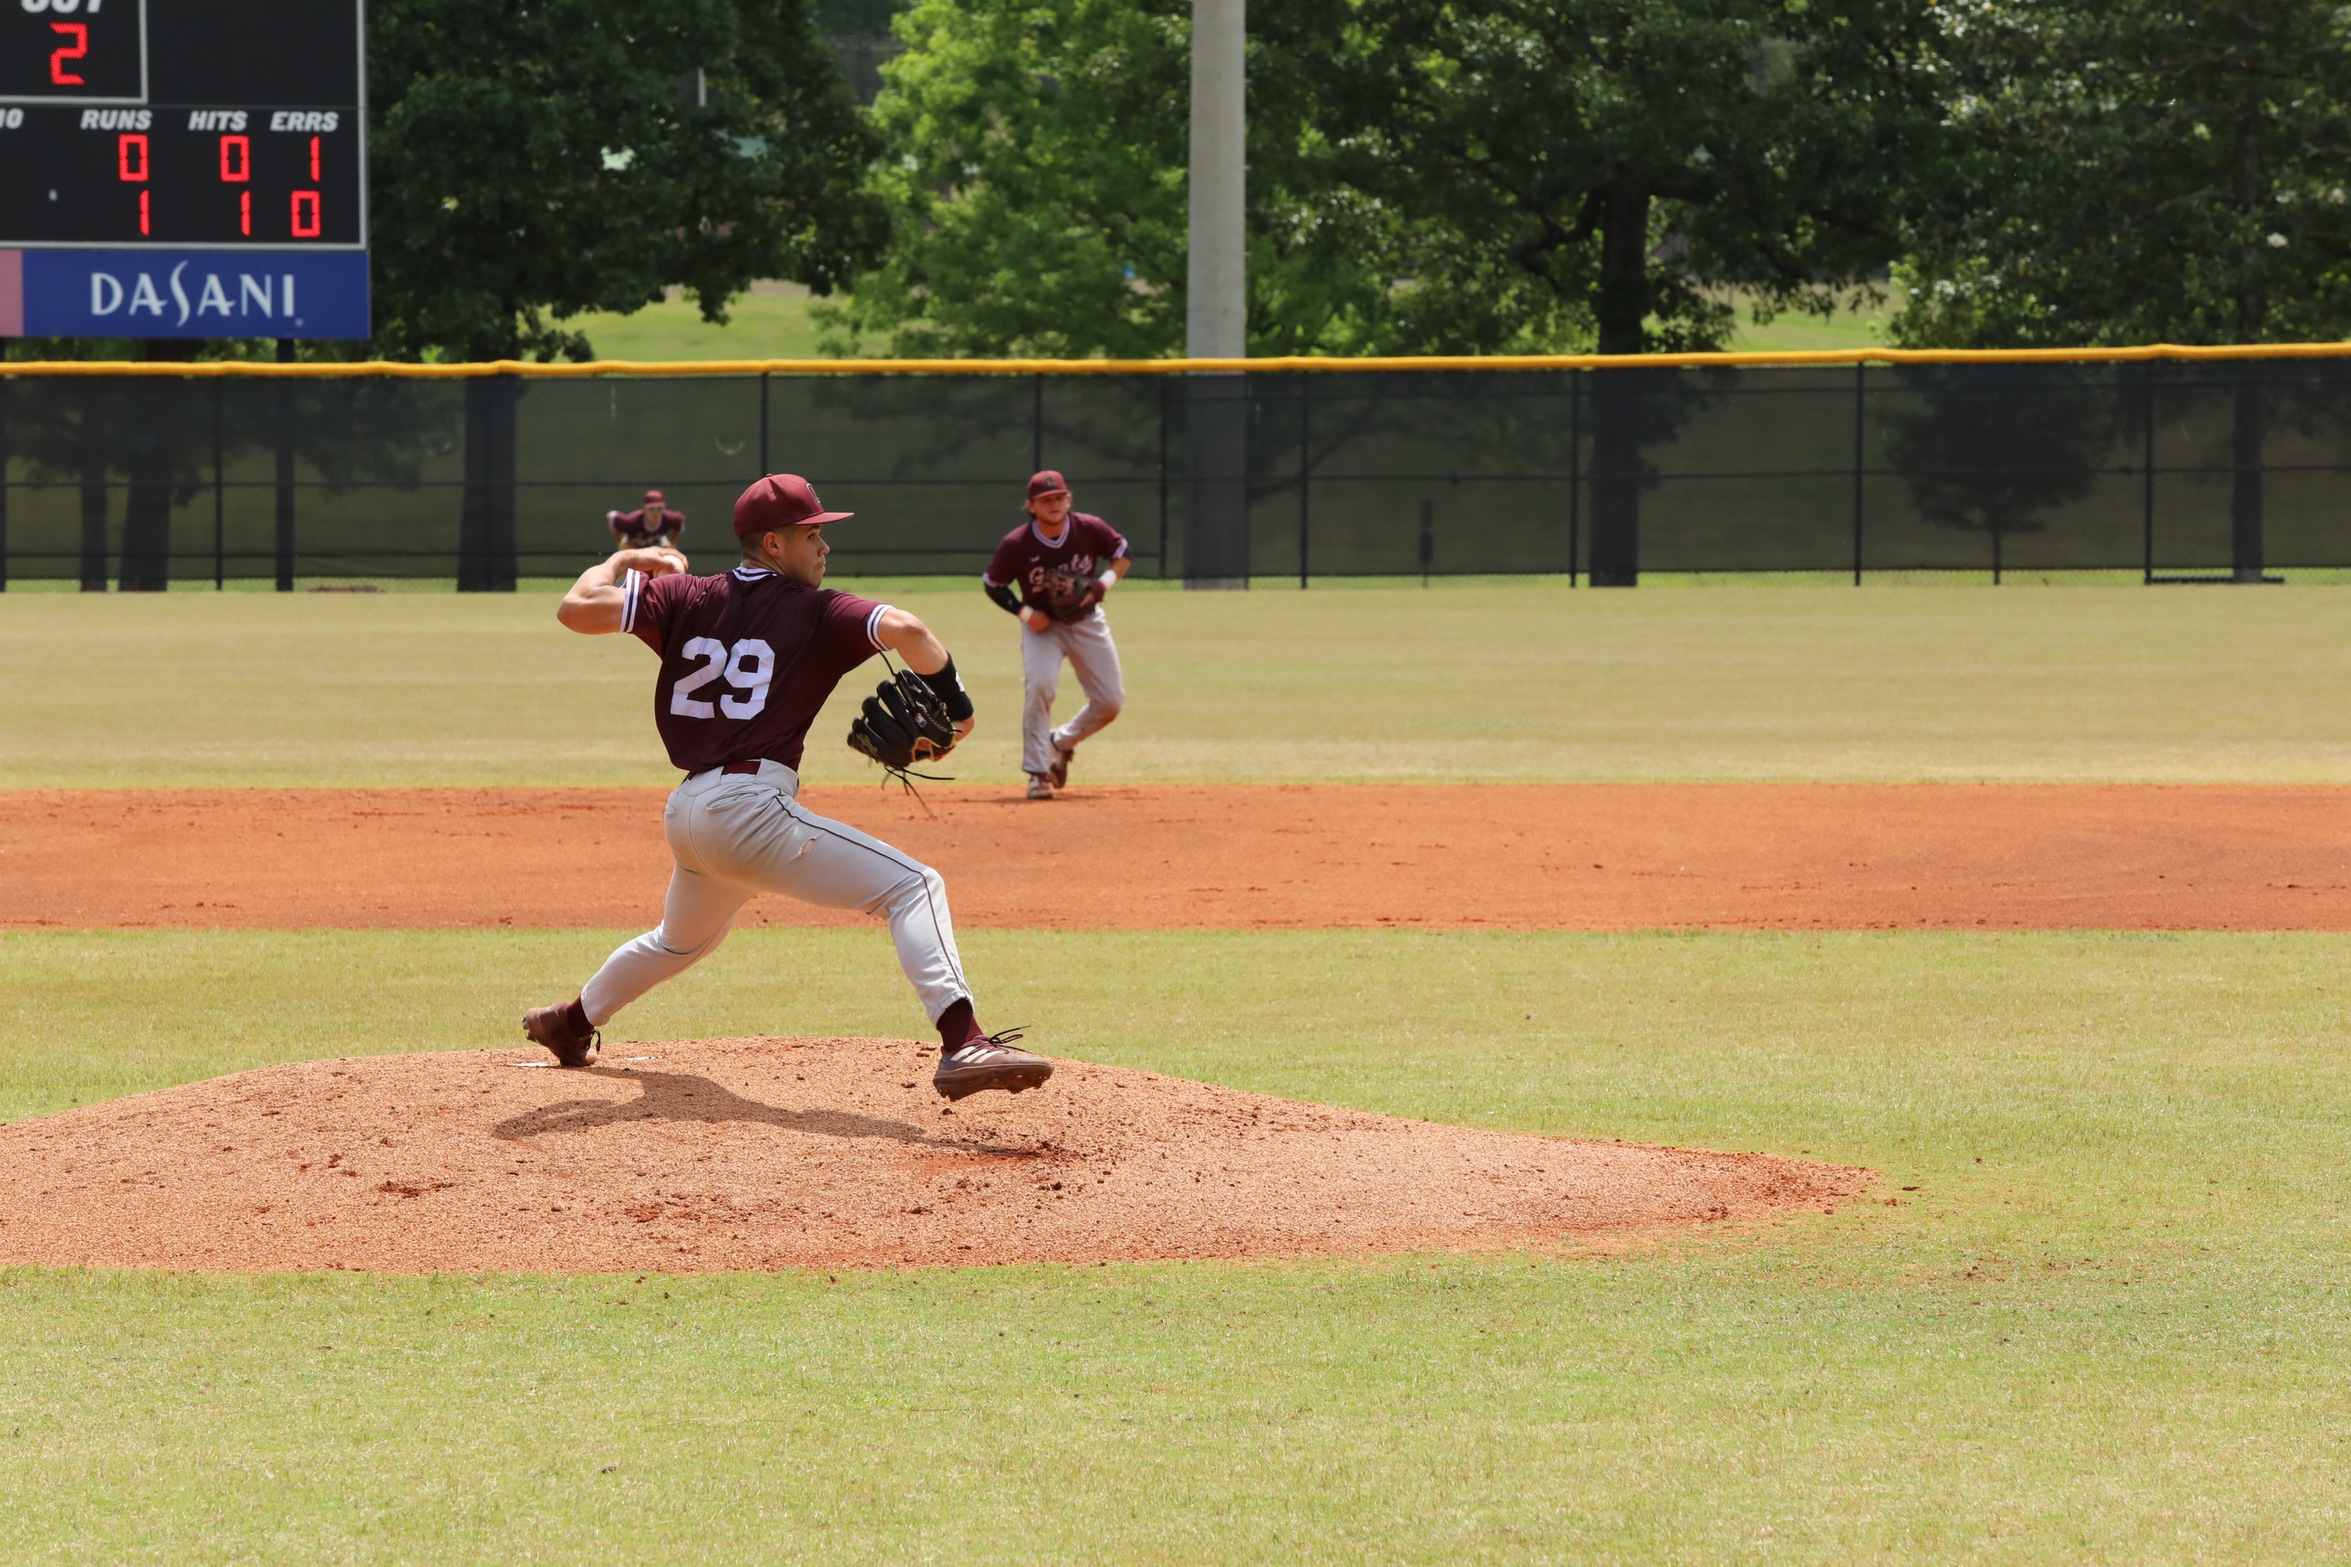 Sophomore All-American Tyler Herrera silenced the nationally-ranked LaGrange Panthers in Friday's shutout win.